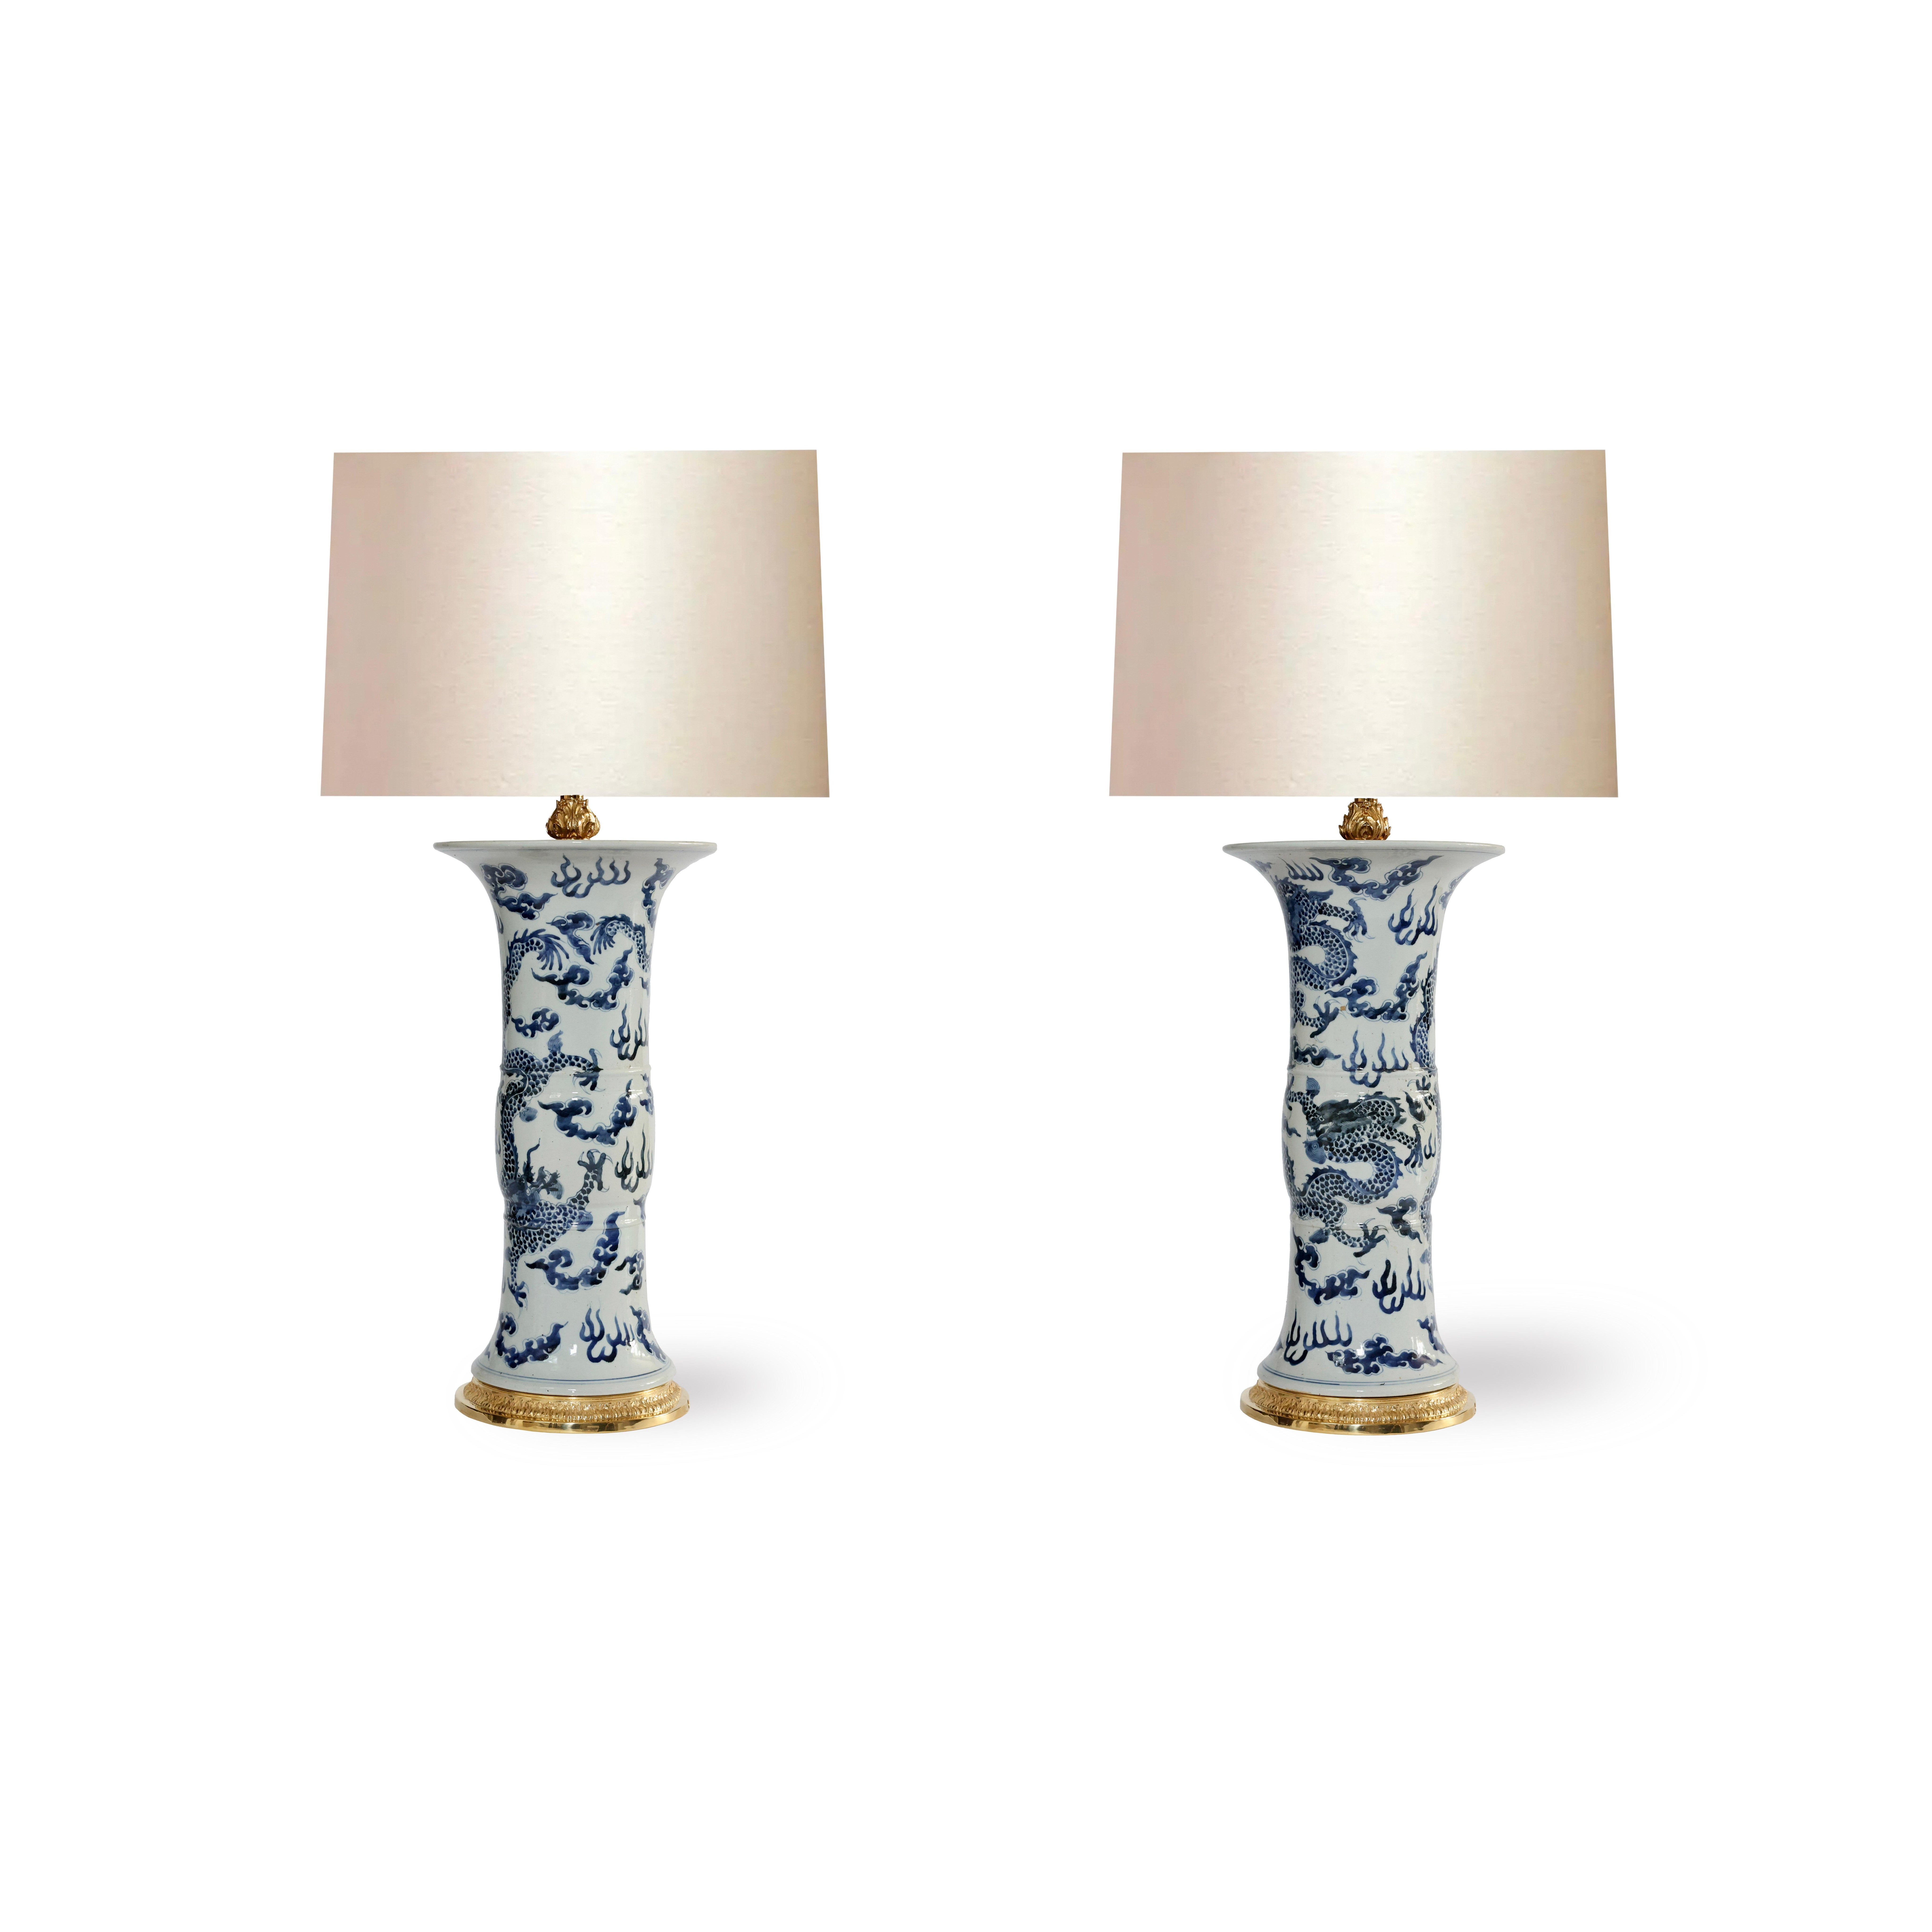 Pair of finely painted blue and white porcelain lamps with gilt brass bases.
to the top of the porcelain vase 19 inch
Each lamp installed two e26 sockets,
lampshades are not included.